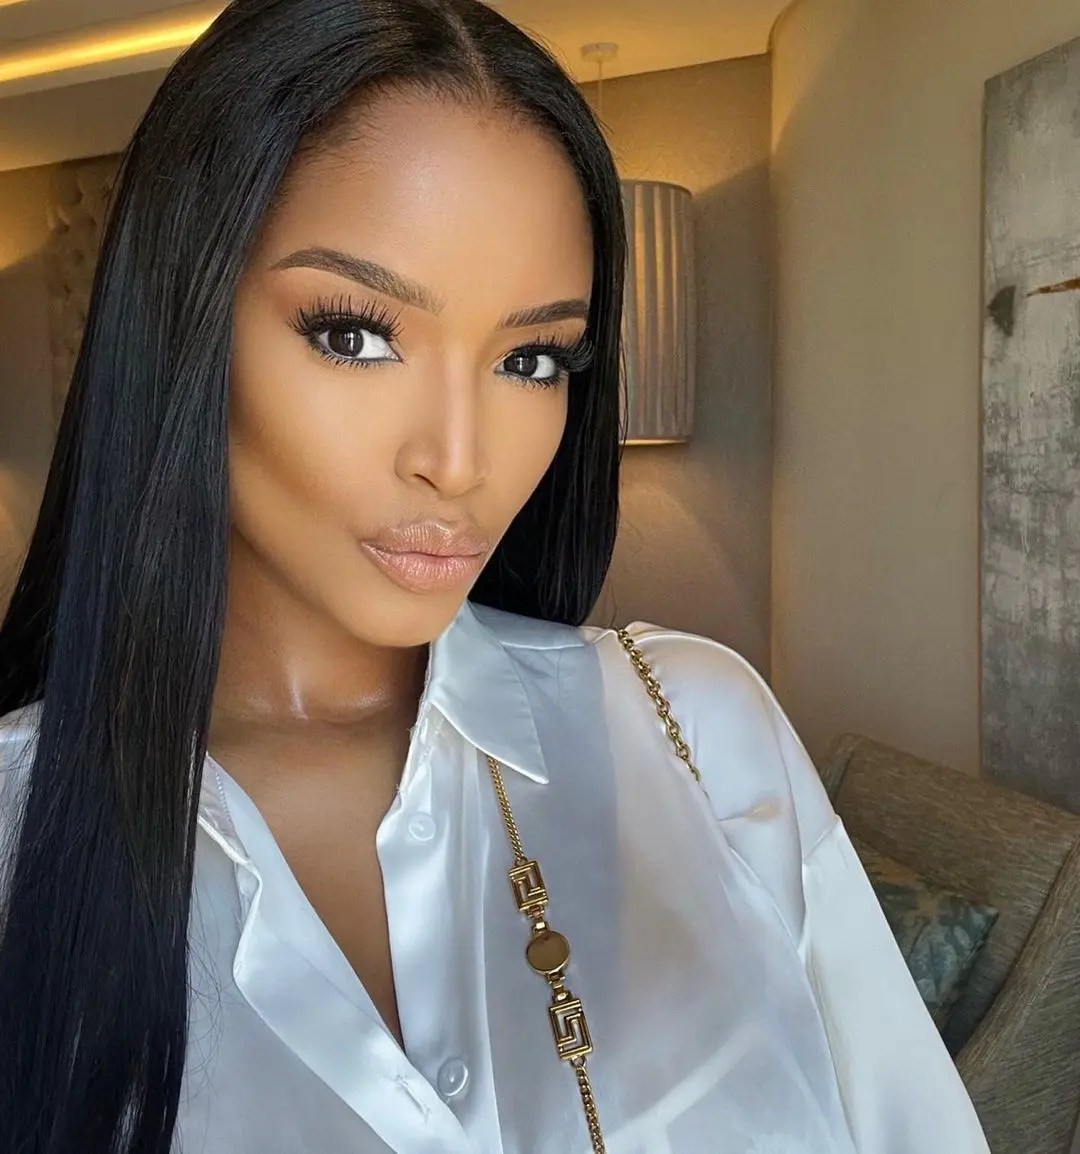 Model Ayanda Thabethe opens up about her horrific experience with a birth control device